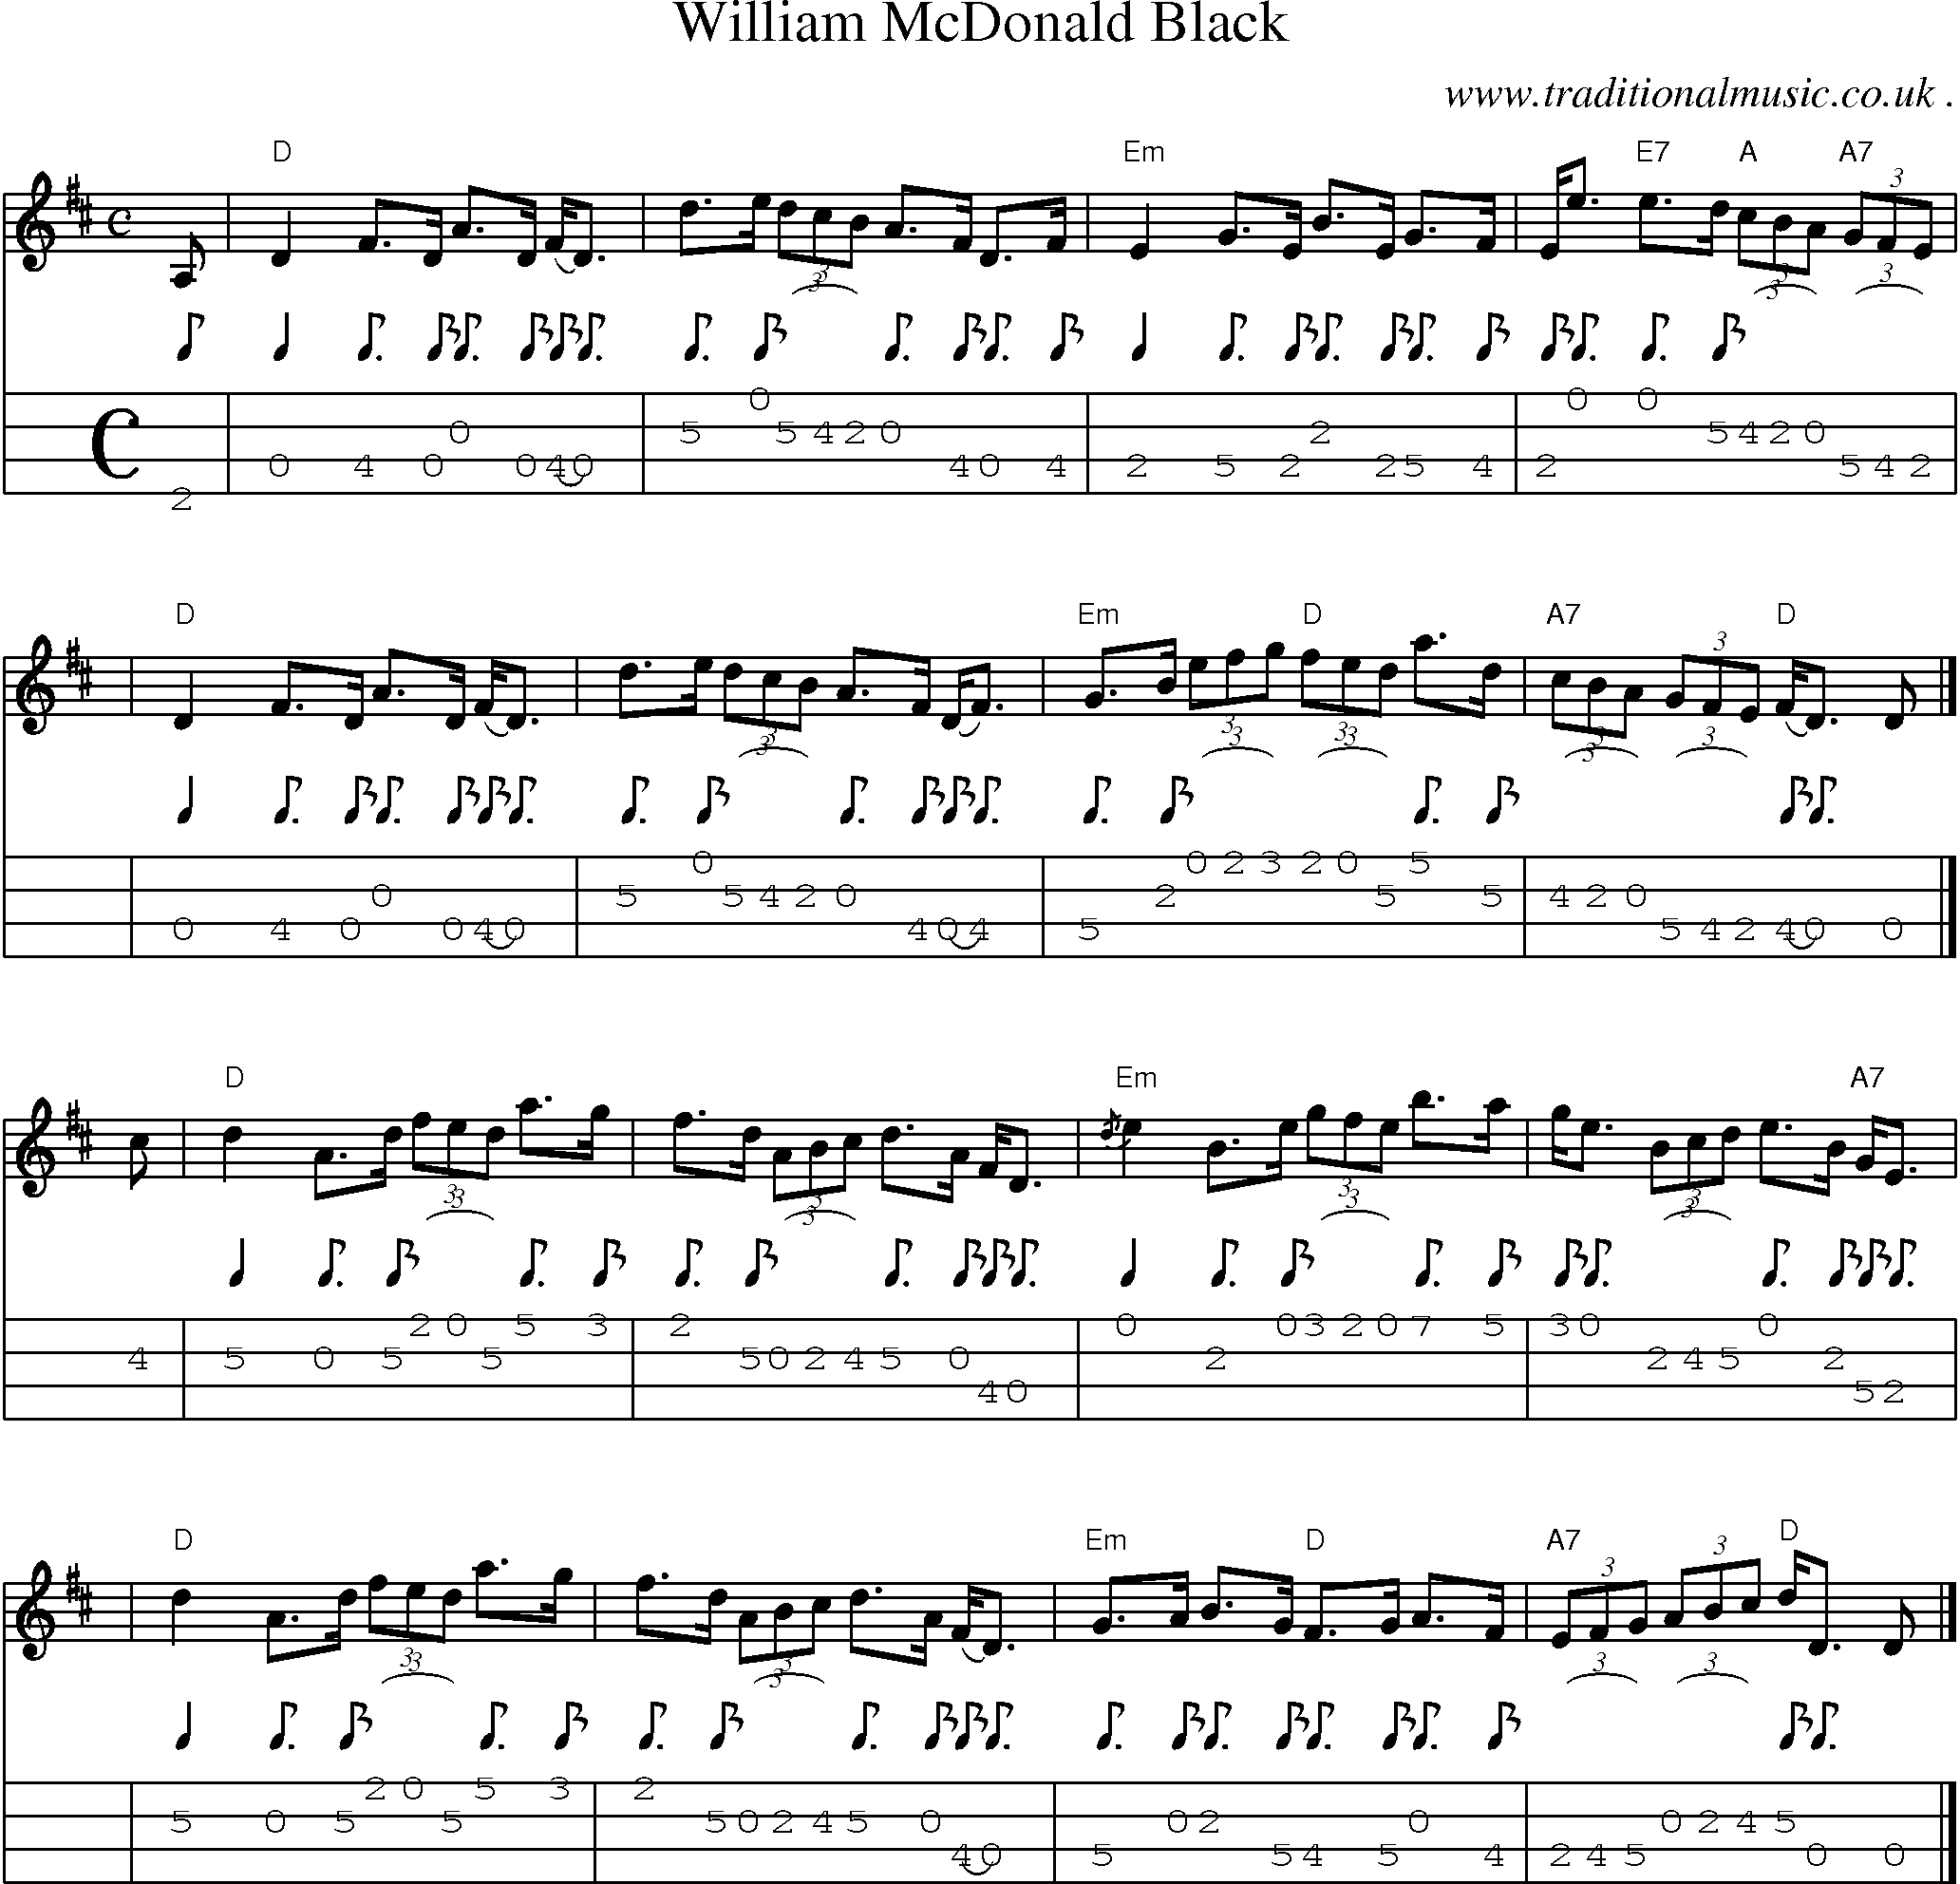 Sheet-music  score, Chords and Mandolin Tabs for William Mcdonald Black